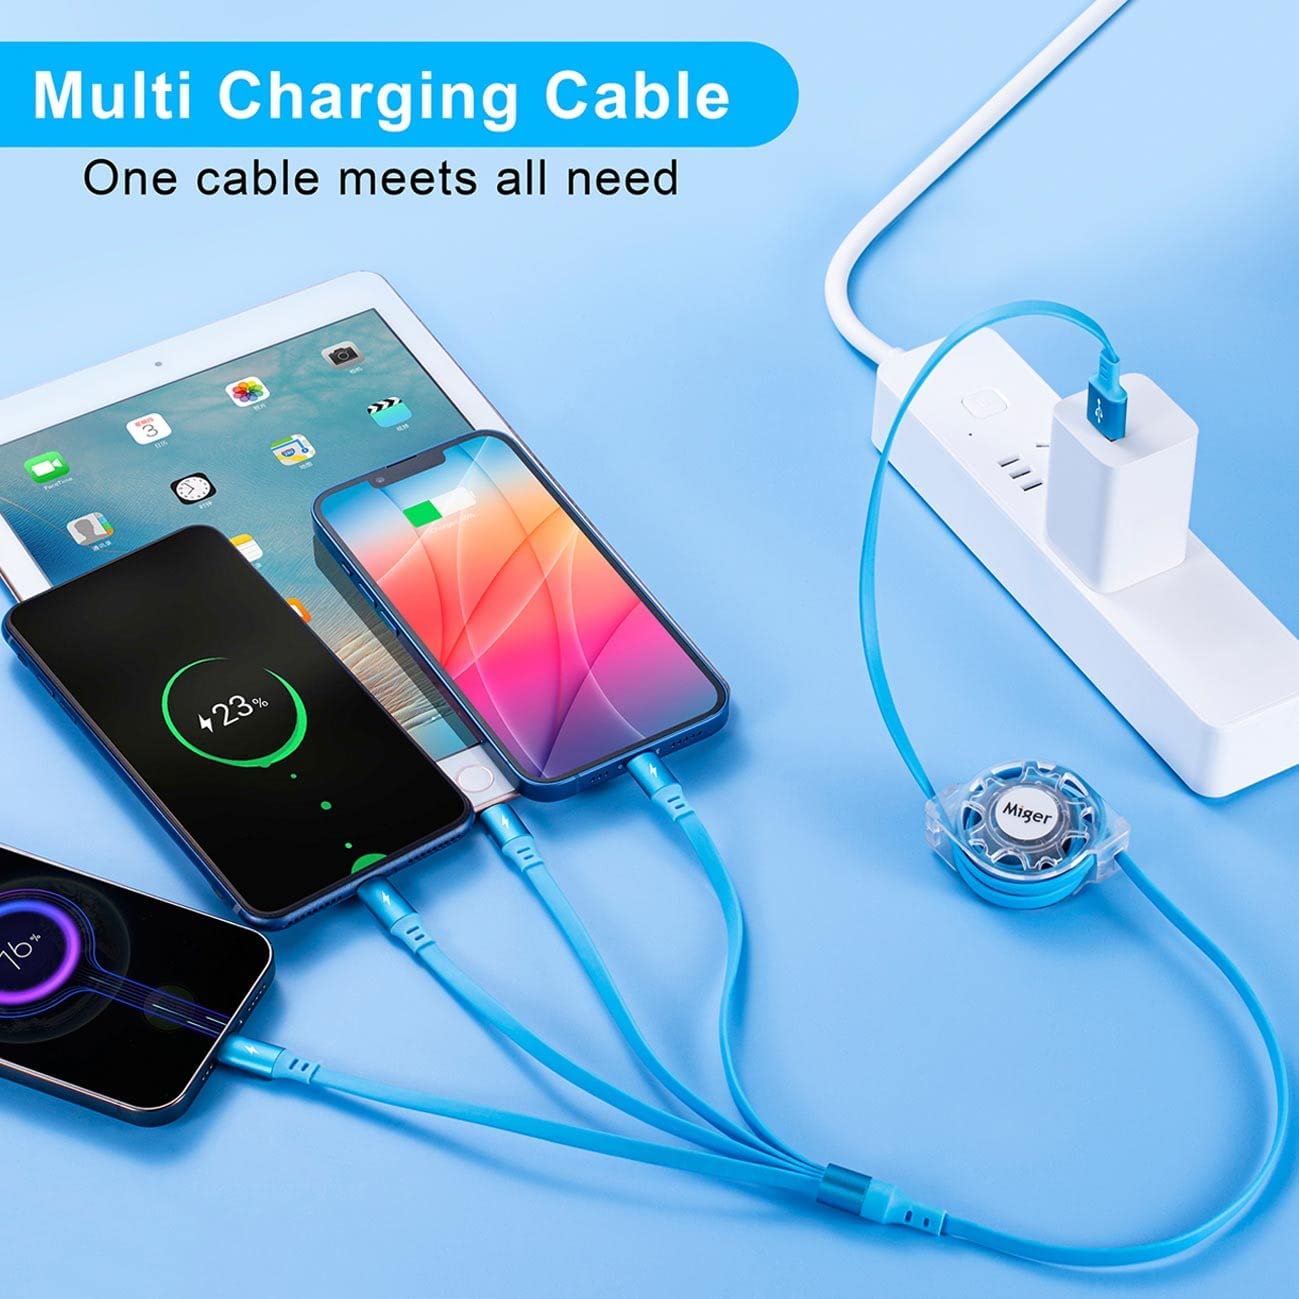 Multi Charging Cable 4A 2Pack 4Ft Retractable Fast Charger Cable 4 in 1 Multi Charging Cord USB Cable with Lightning/Type C/Micro USB Ports for Cell Phones,iPhone,iPad,Samsung Galaxy,Tablets and More